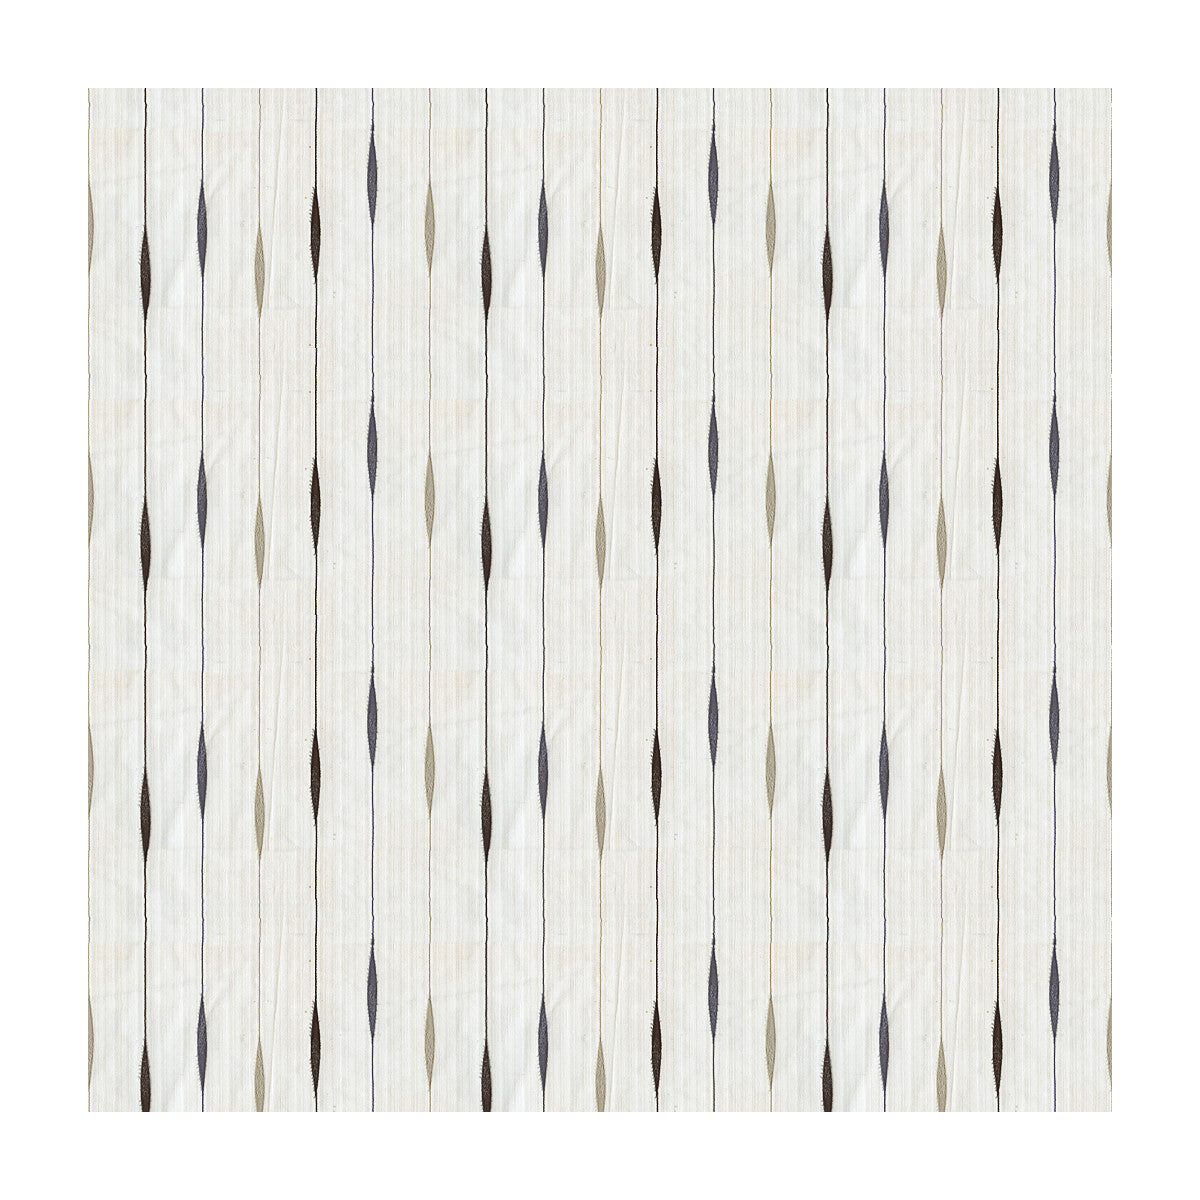 Kravet Contract fabric in 4160-1611 color - pattern 4160.1611.0 - by Kravet Contract